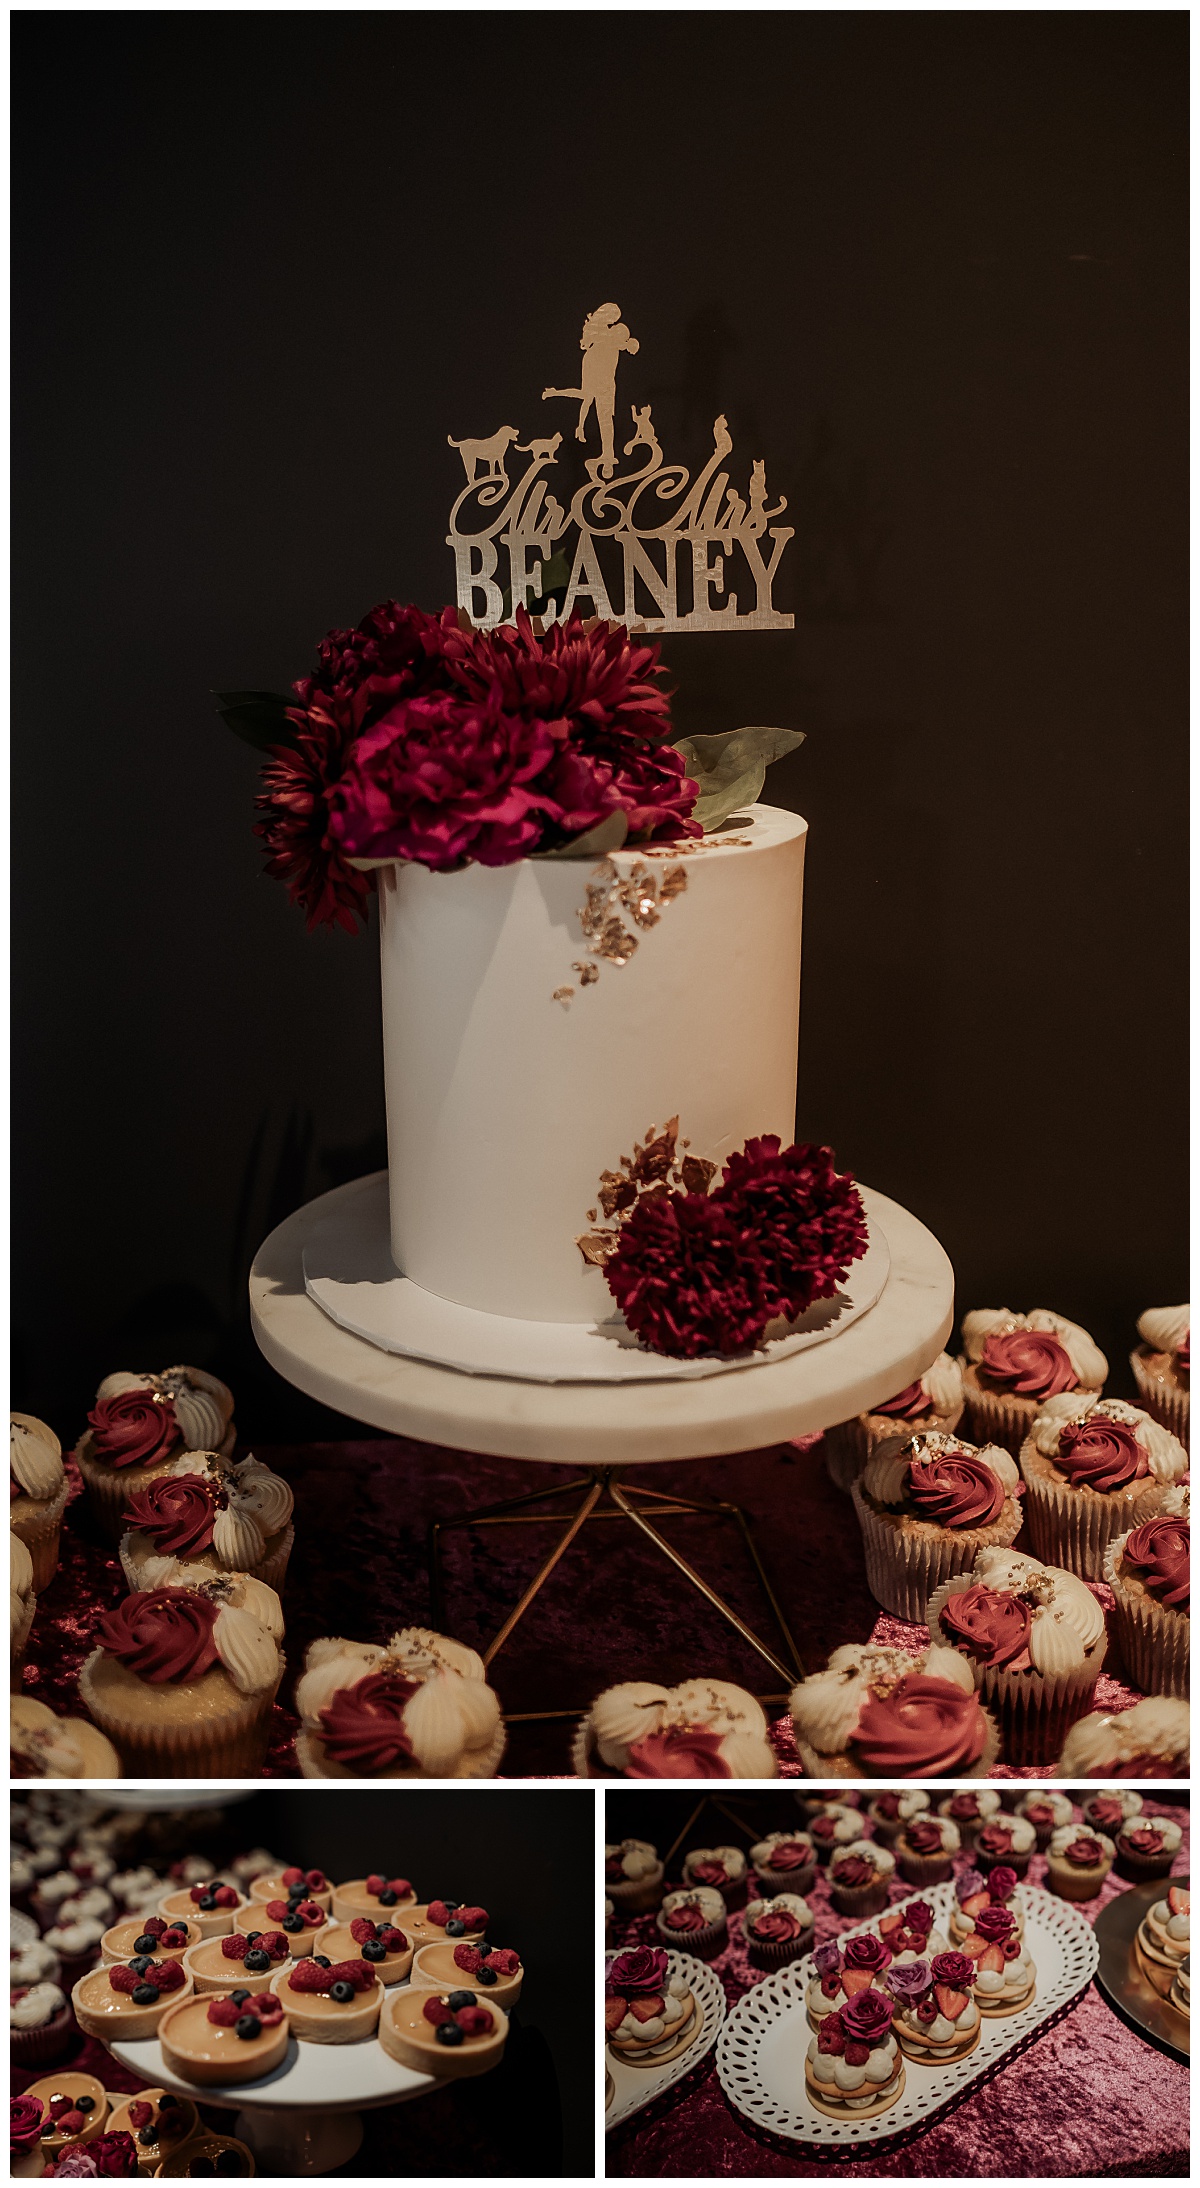 Wedding cake for a moody and romantic wedding at The West Events, an industrial wedding venue in Madeira Beach, FL. 